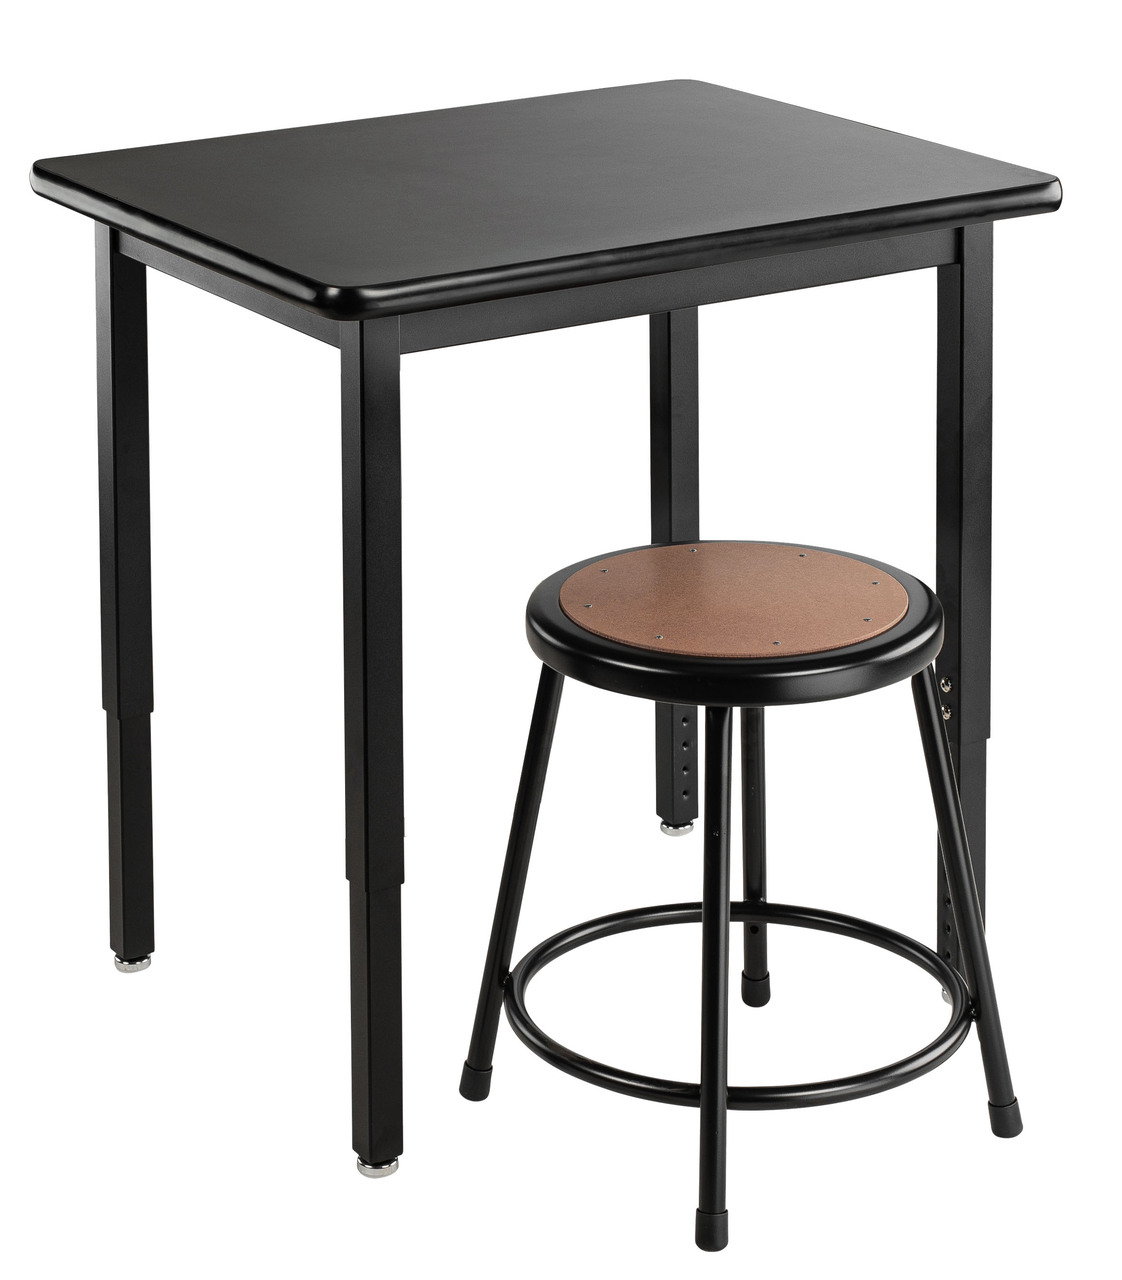 NPS Steel Science Lab Table -  36" x 36" -  HPL Top - Black Surface Color